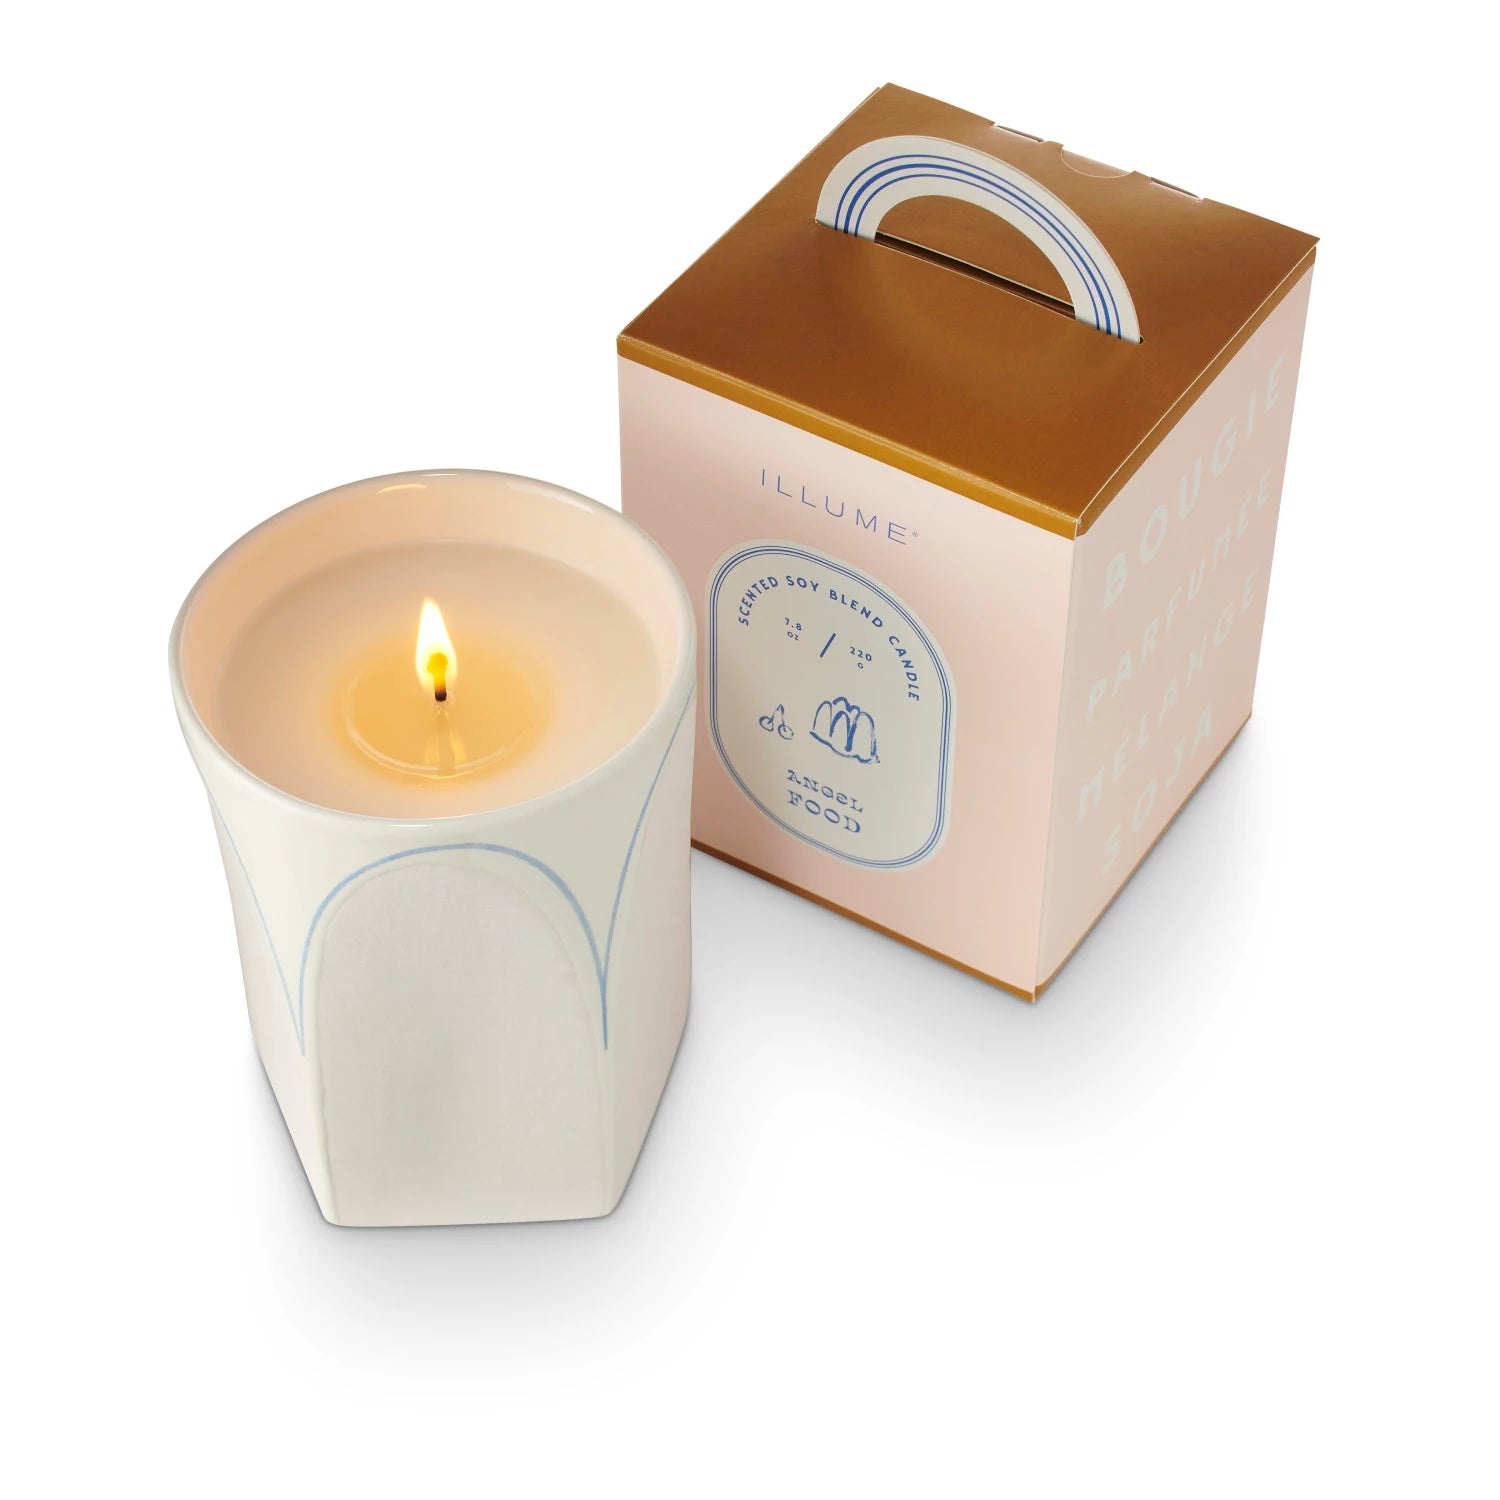 Petite Patisserie Boxed Candle